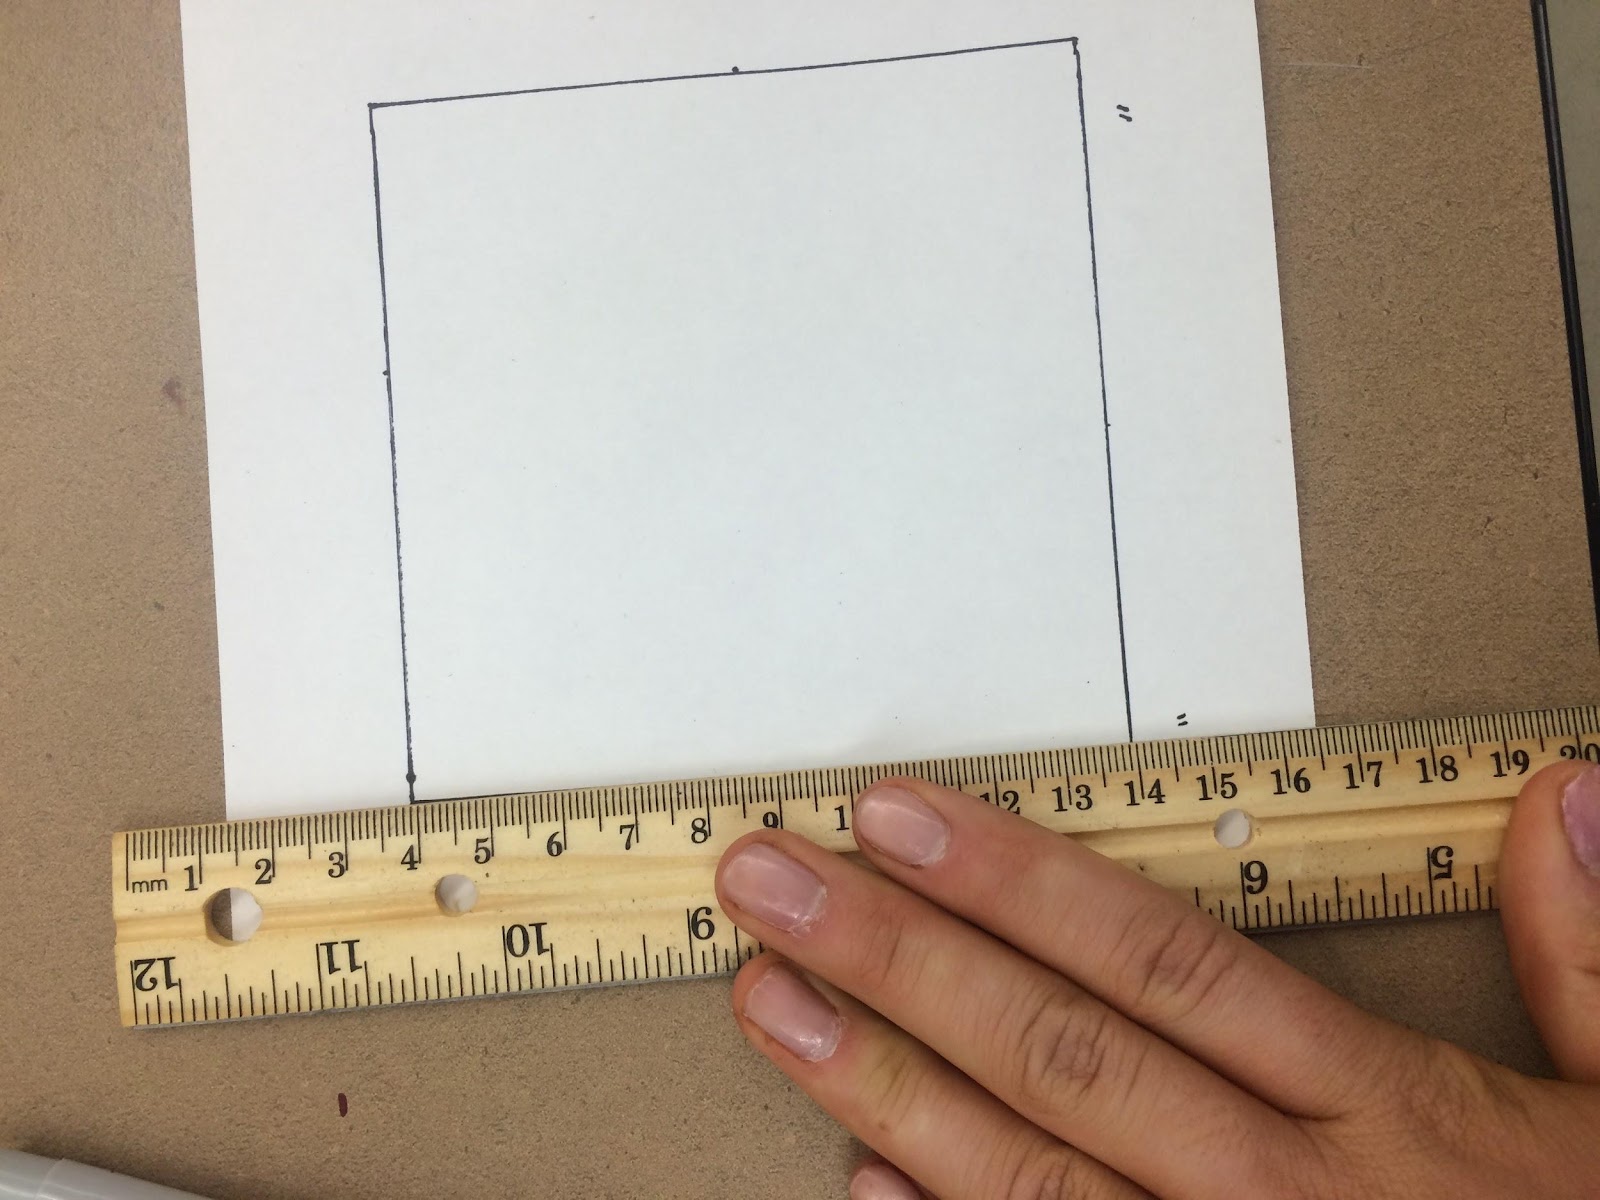 Picture of hand holding a ruler and measuring a piece of paper.